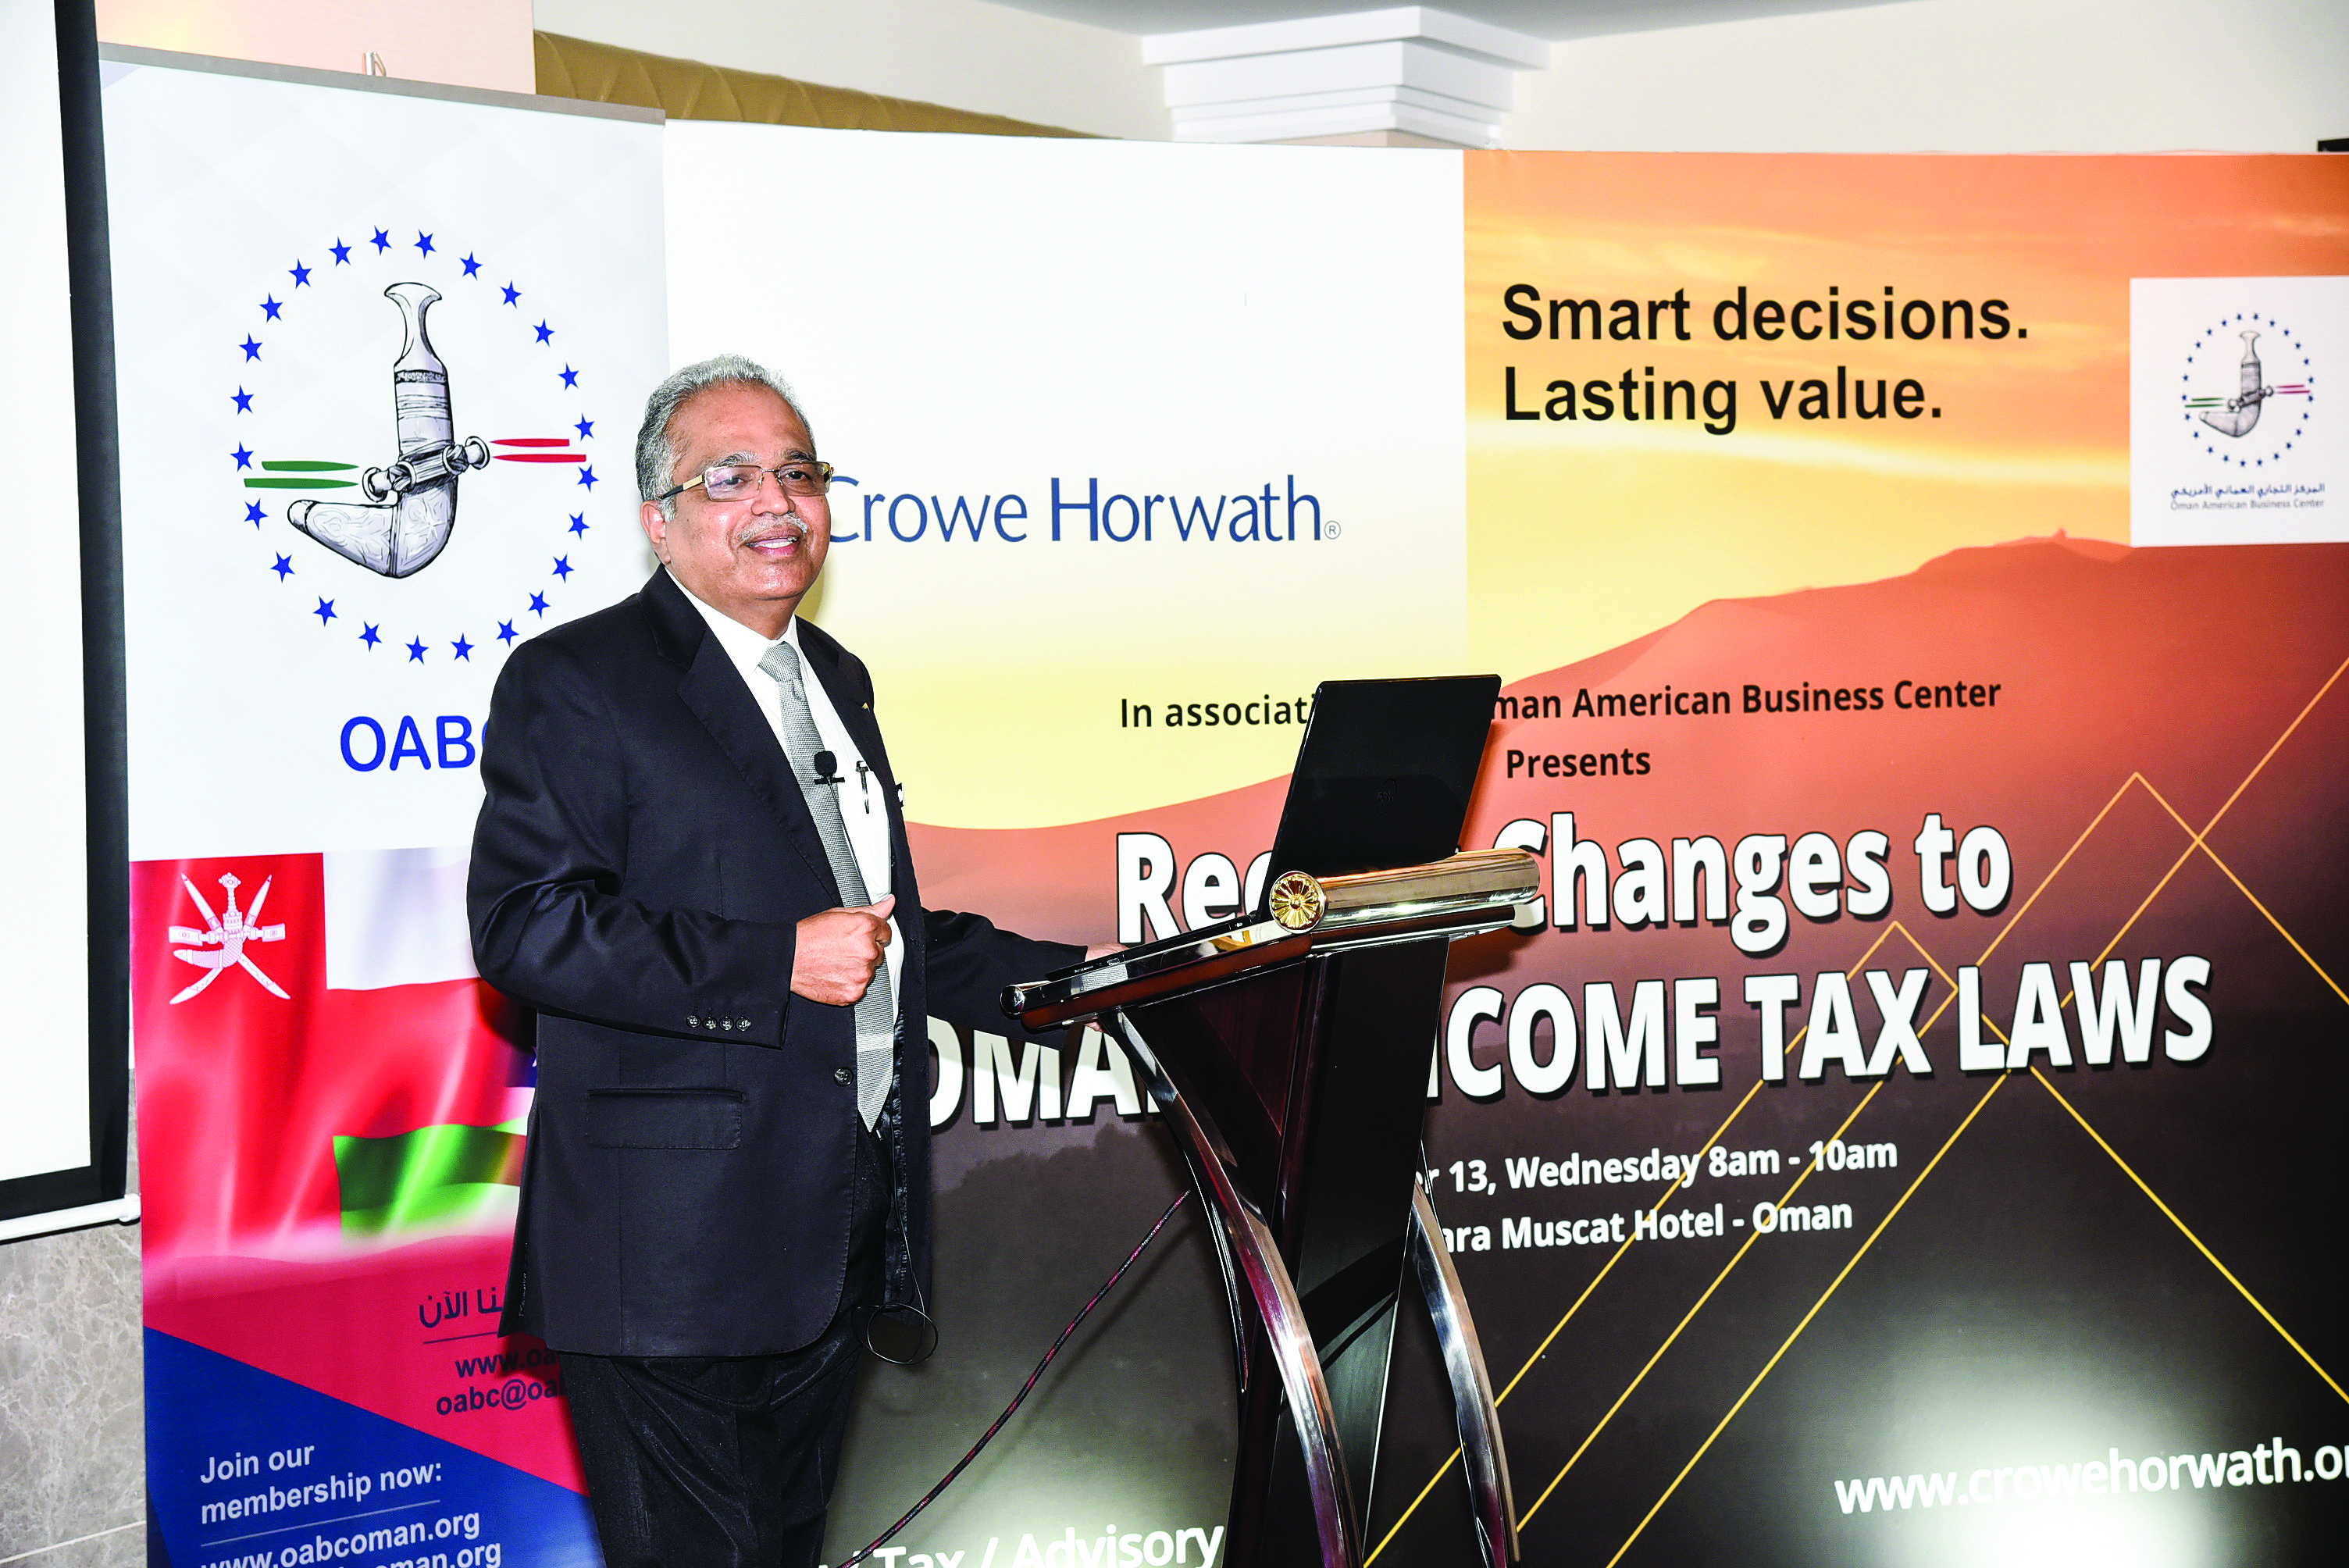 Tax seminar in Oman focuses on compliance issue